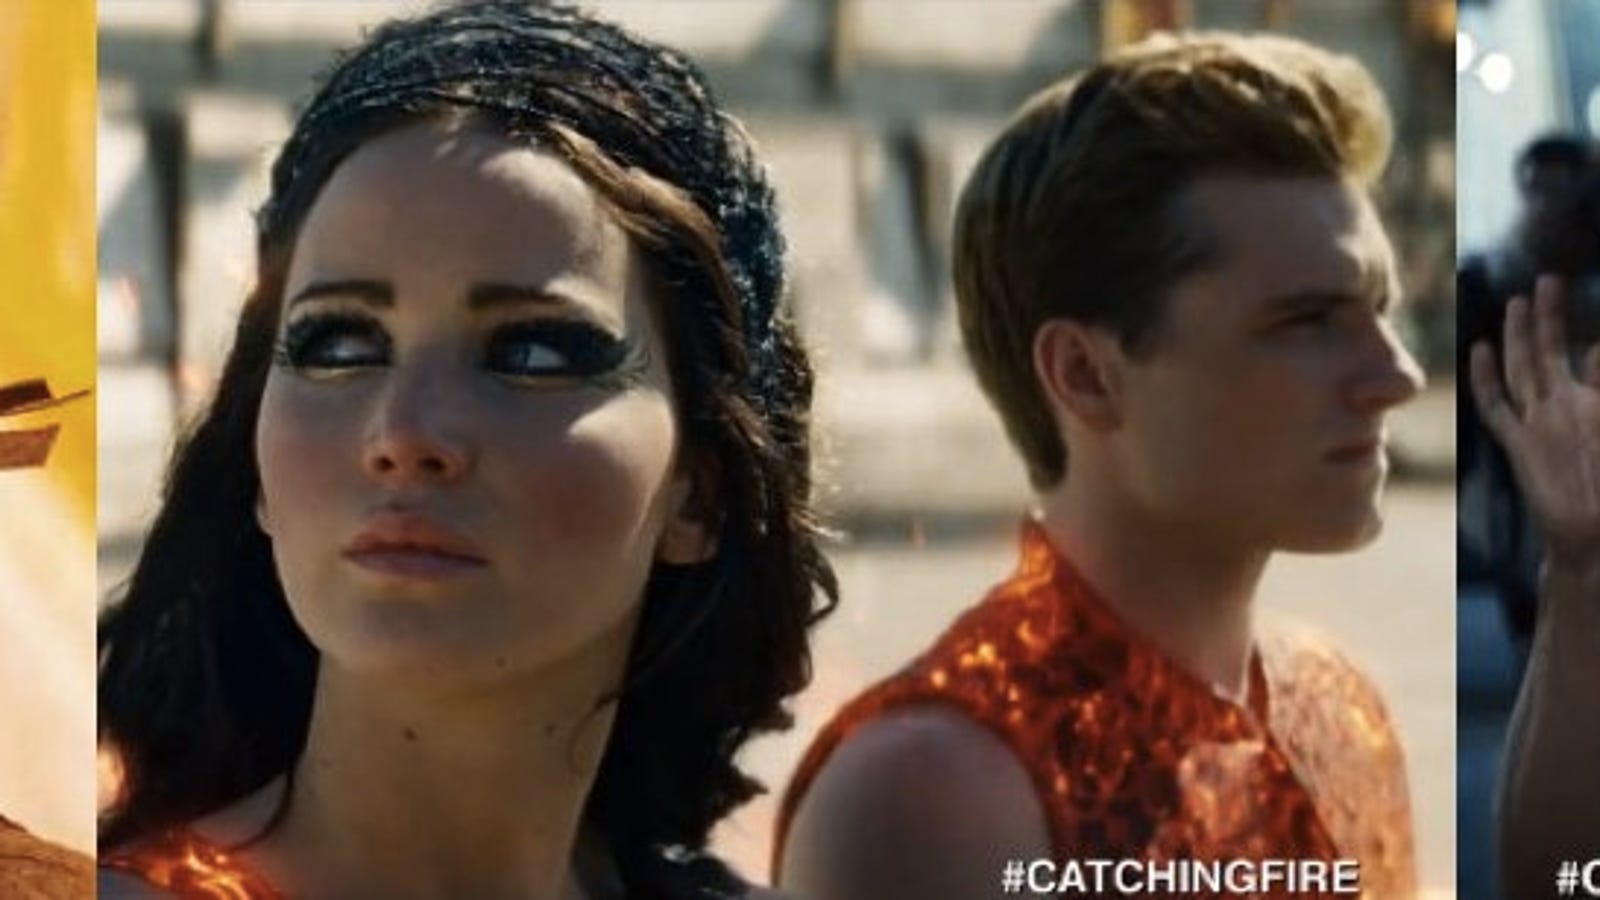 Catching Fire trailer introduces the new cast of Hunger Games Victors